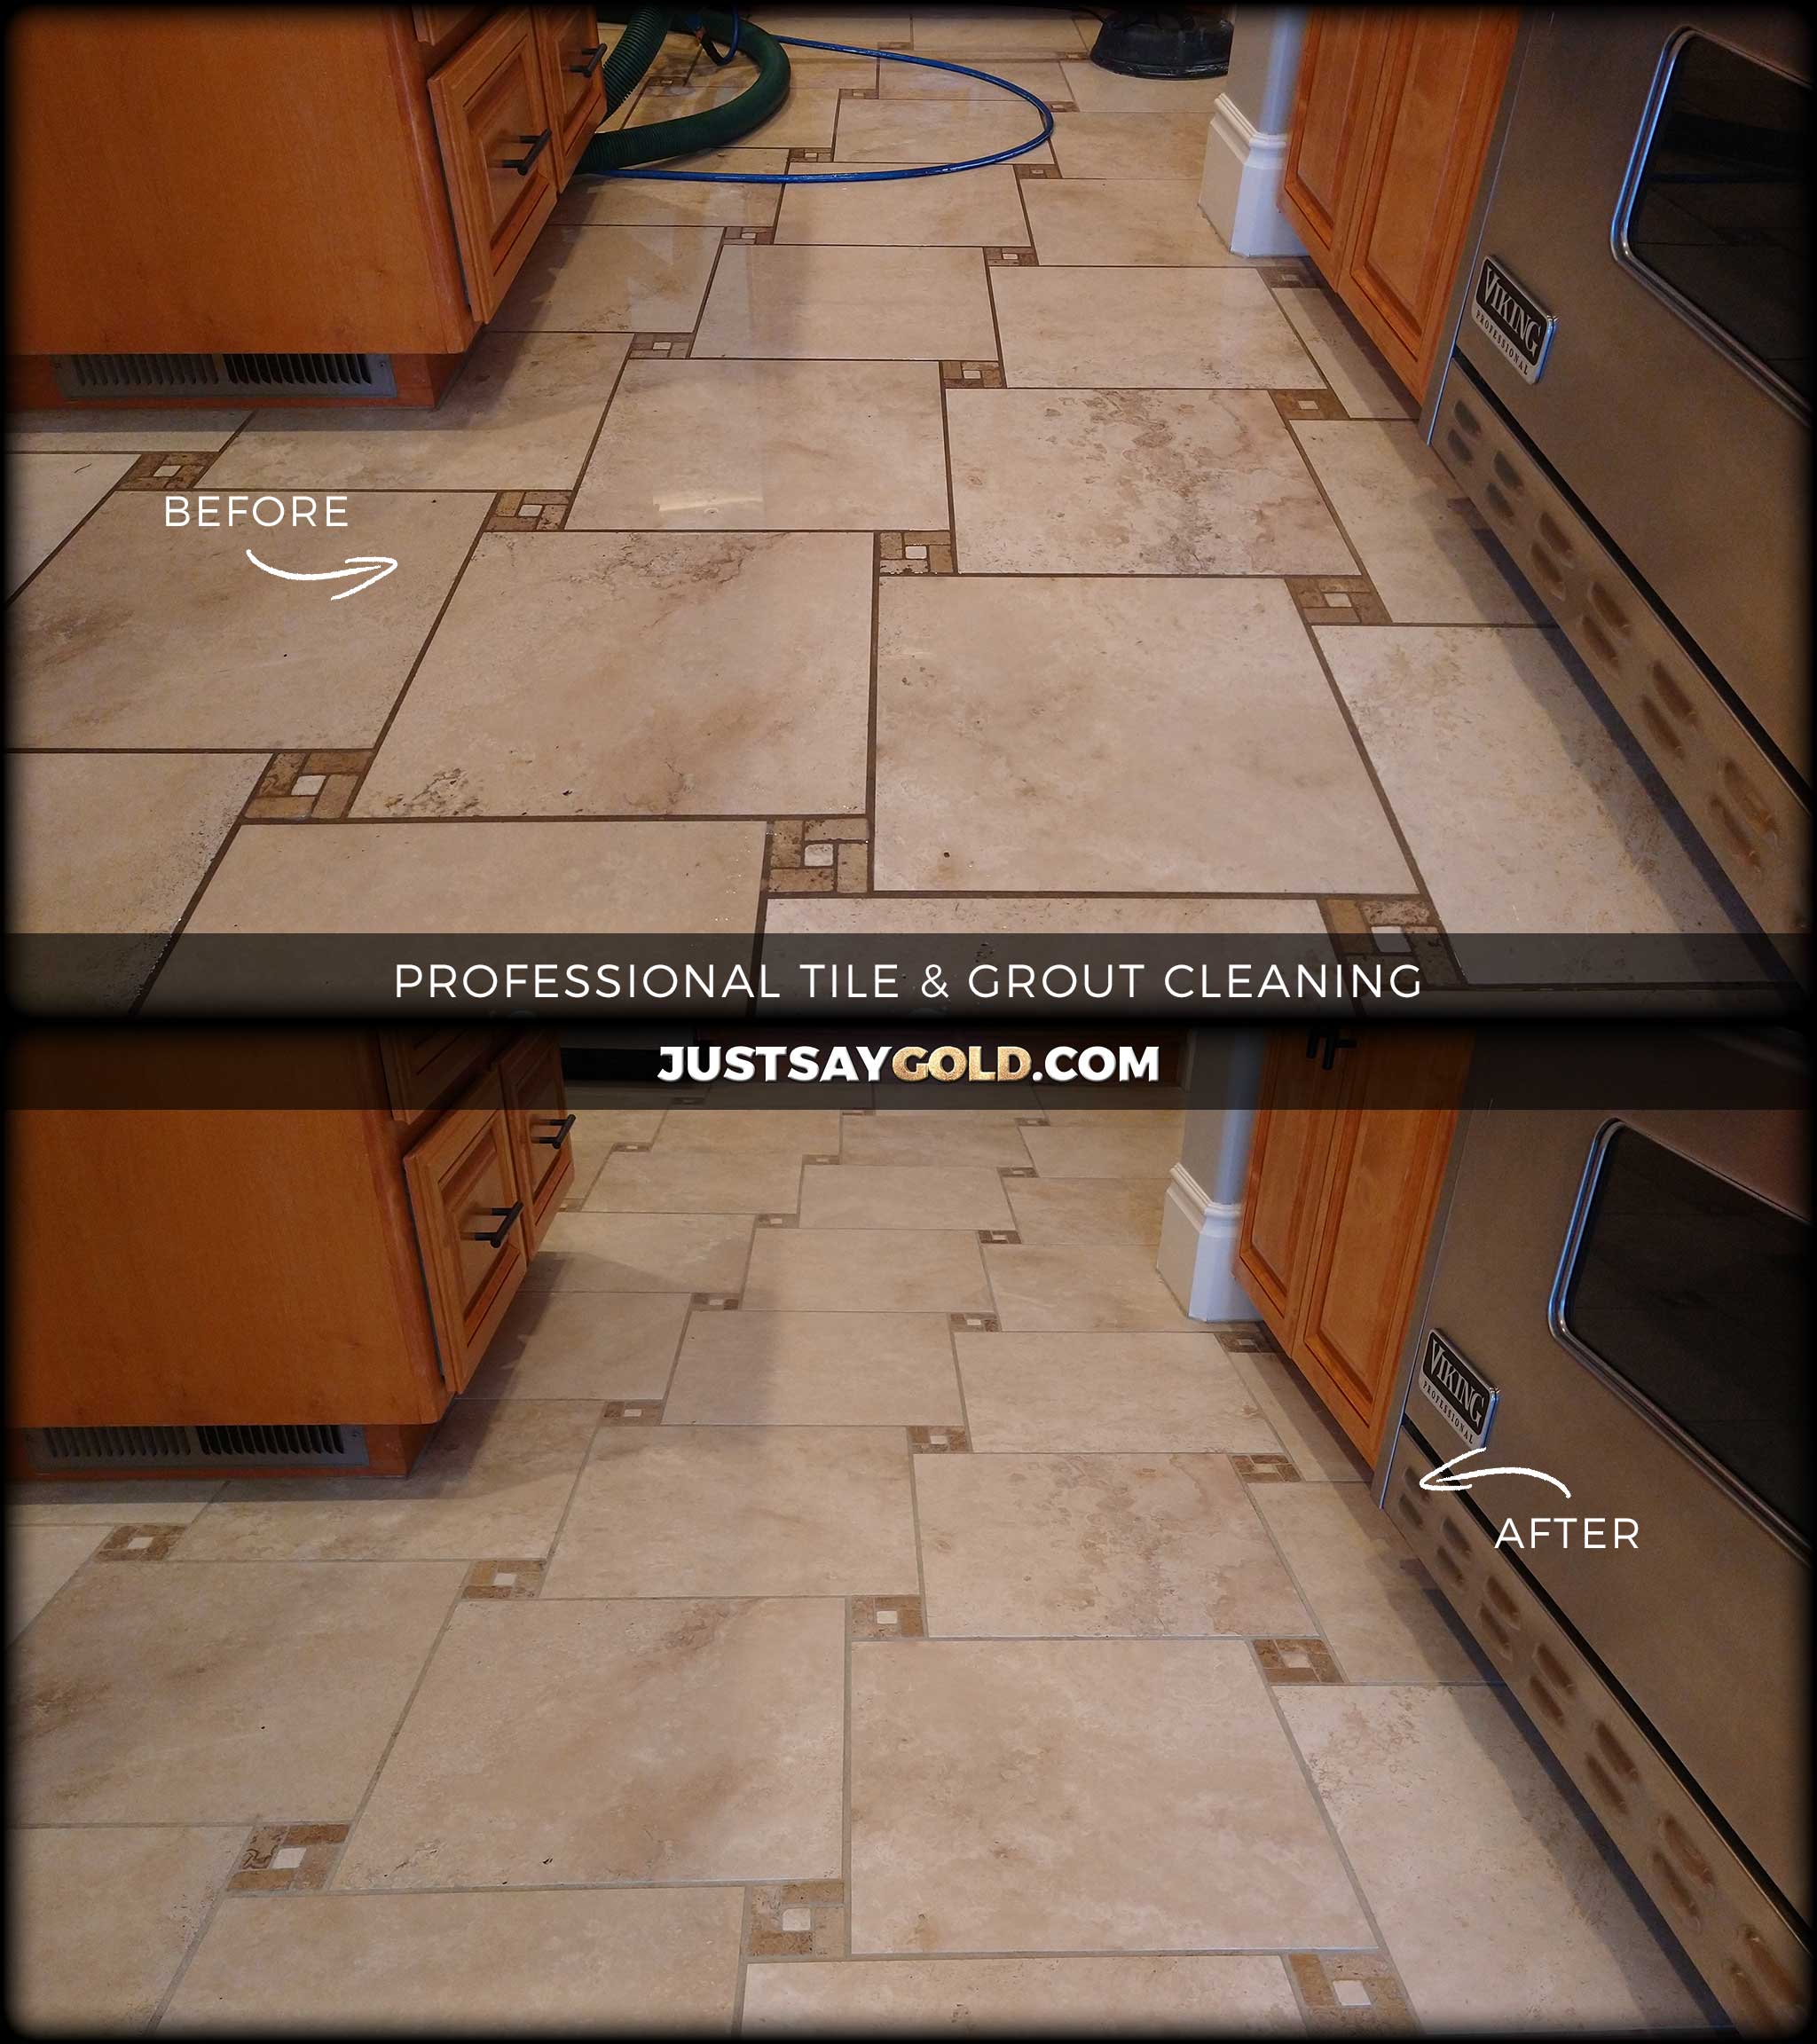 https://goldcoastfloor.com/assets/images/causes/slider/full-deep-clean-tile-and-grout-cleaning-company-roseville-ca-park-oak-drive.jpg